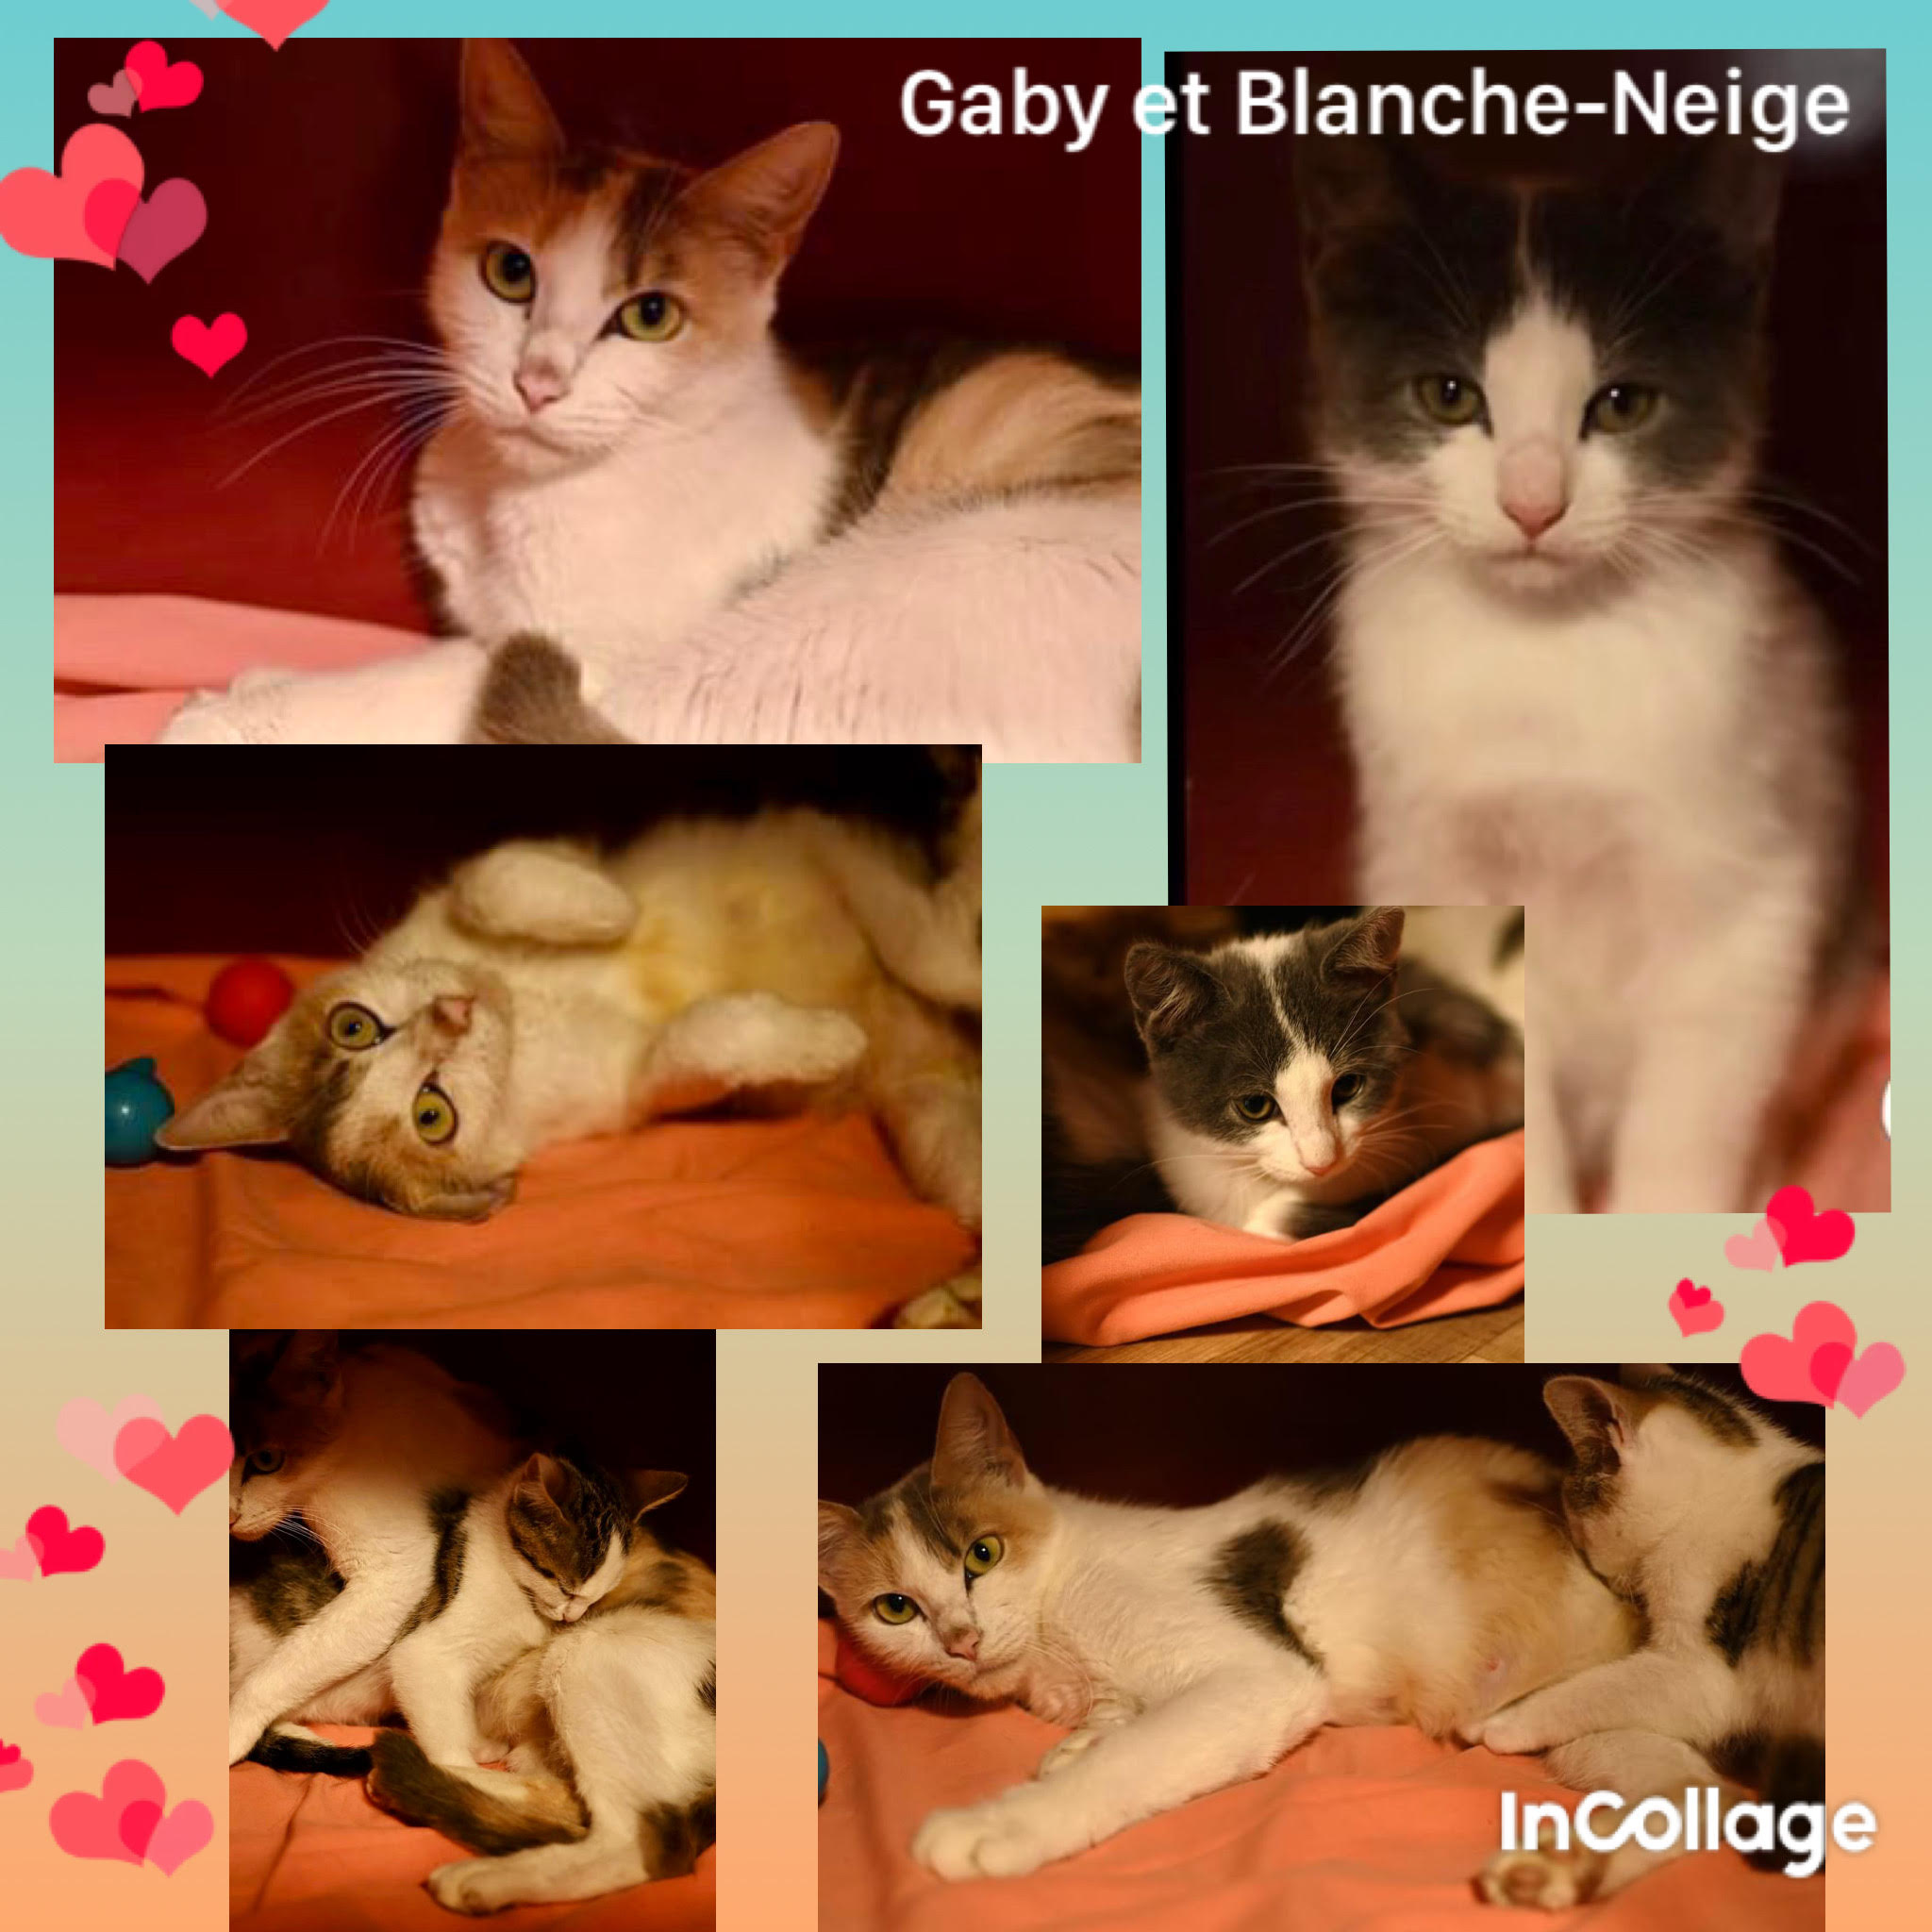 Gaby et sa maman Blanche-Neige